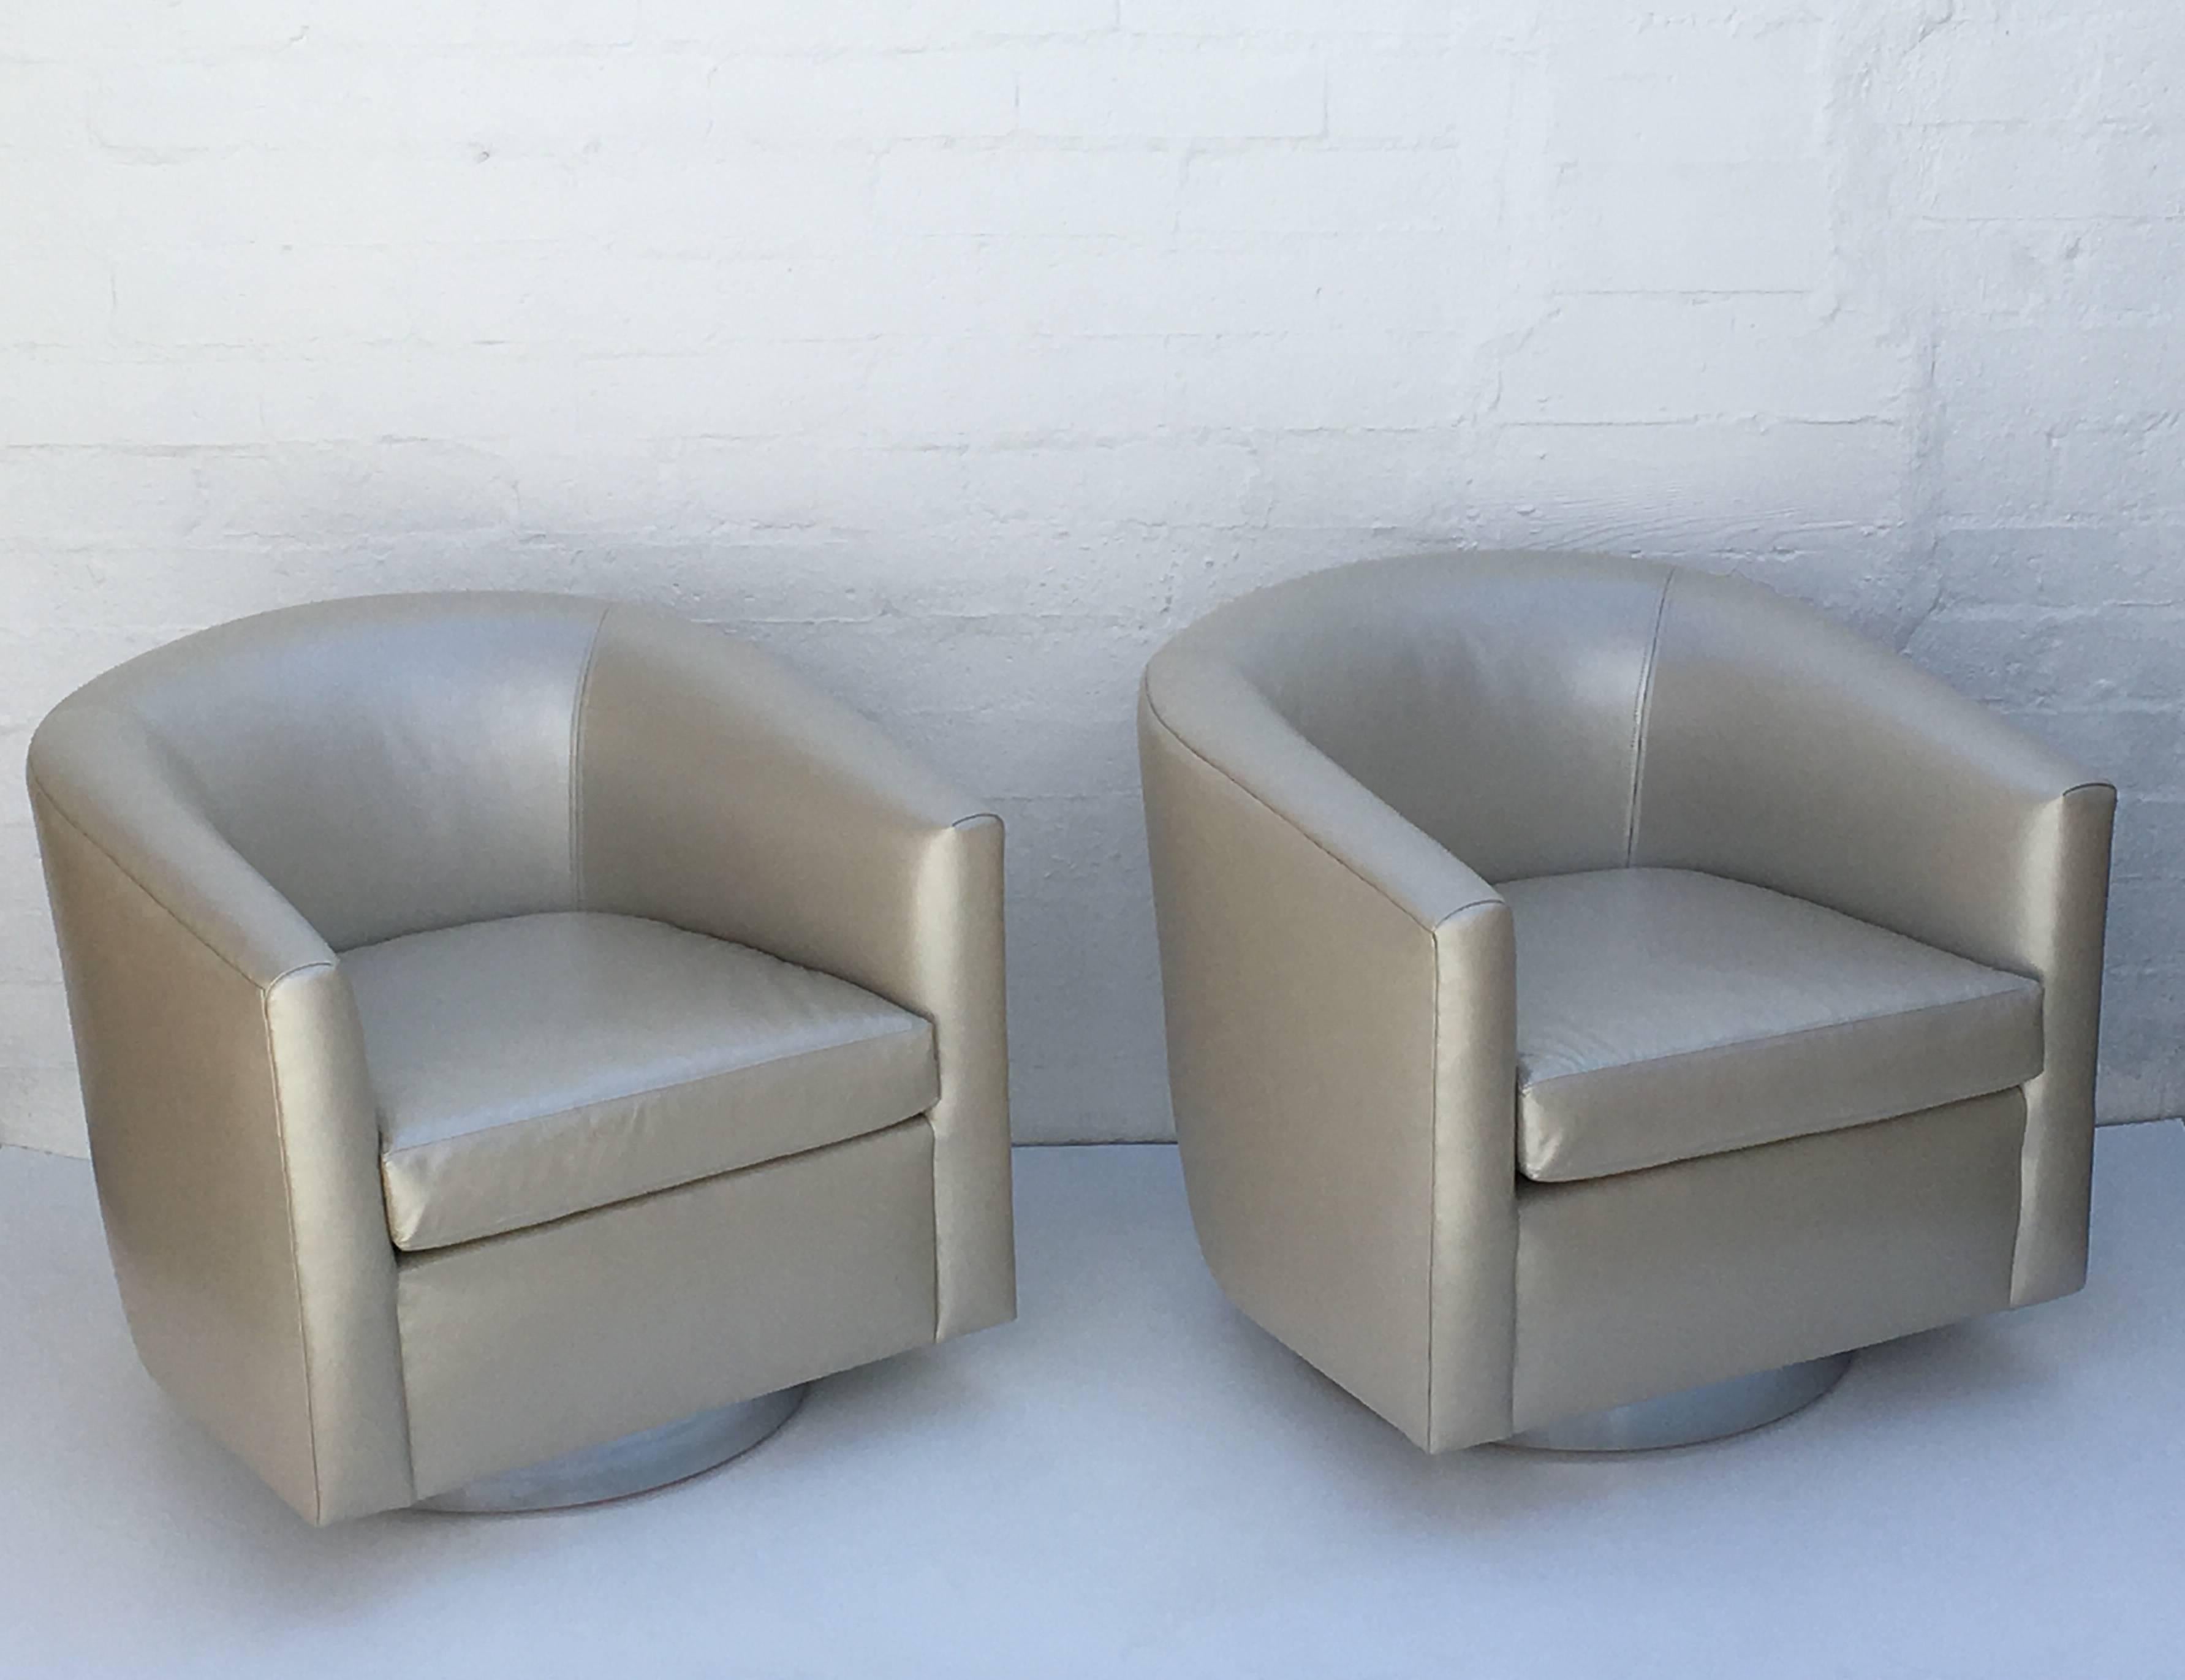 A pair of chrome and leather barrel swivel chair by Martin Brattrud for Steve Chase. This came out of a Steve Chase estate. Newly reupholstered in a soft pearl color leather.